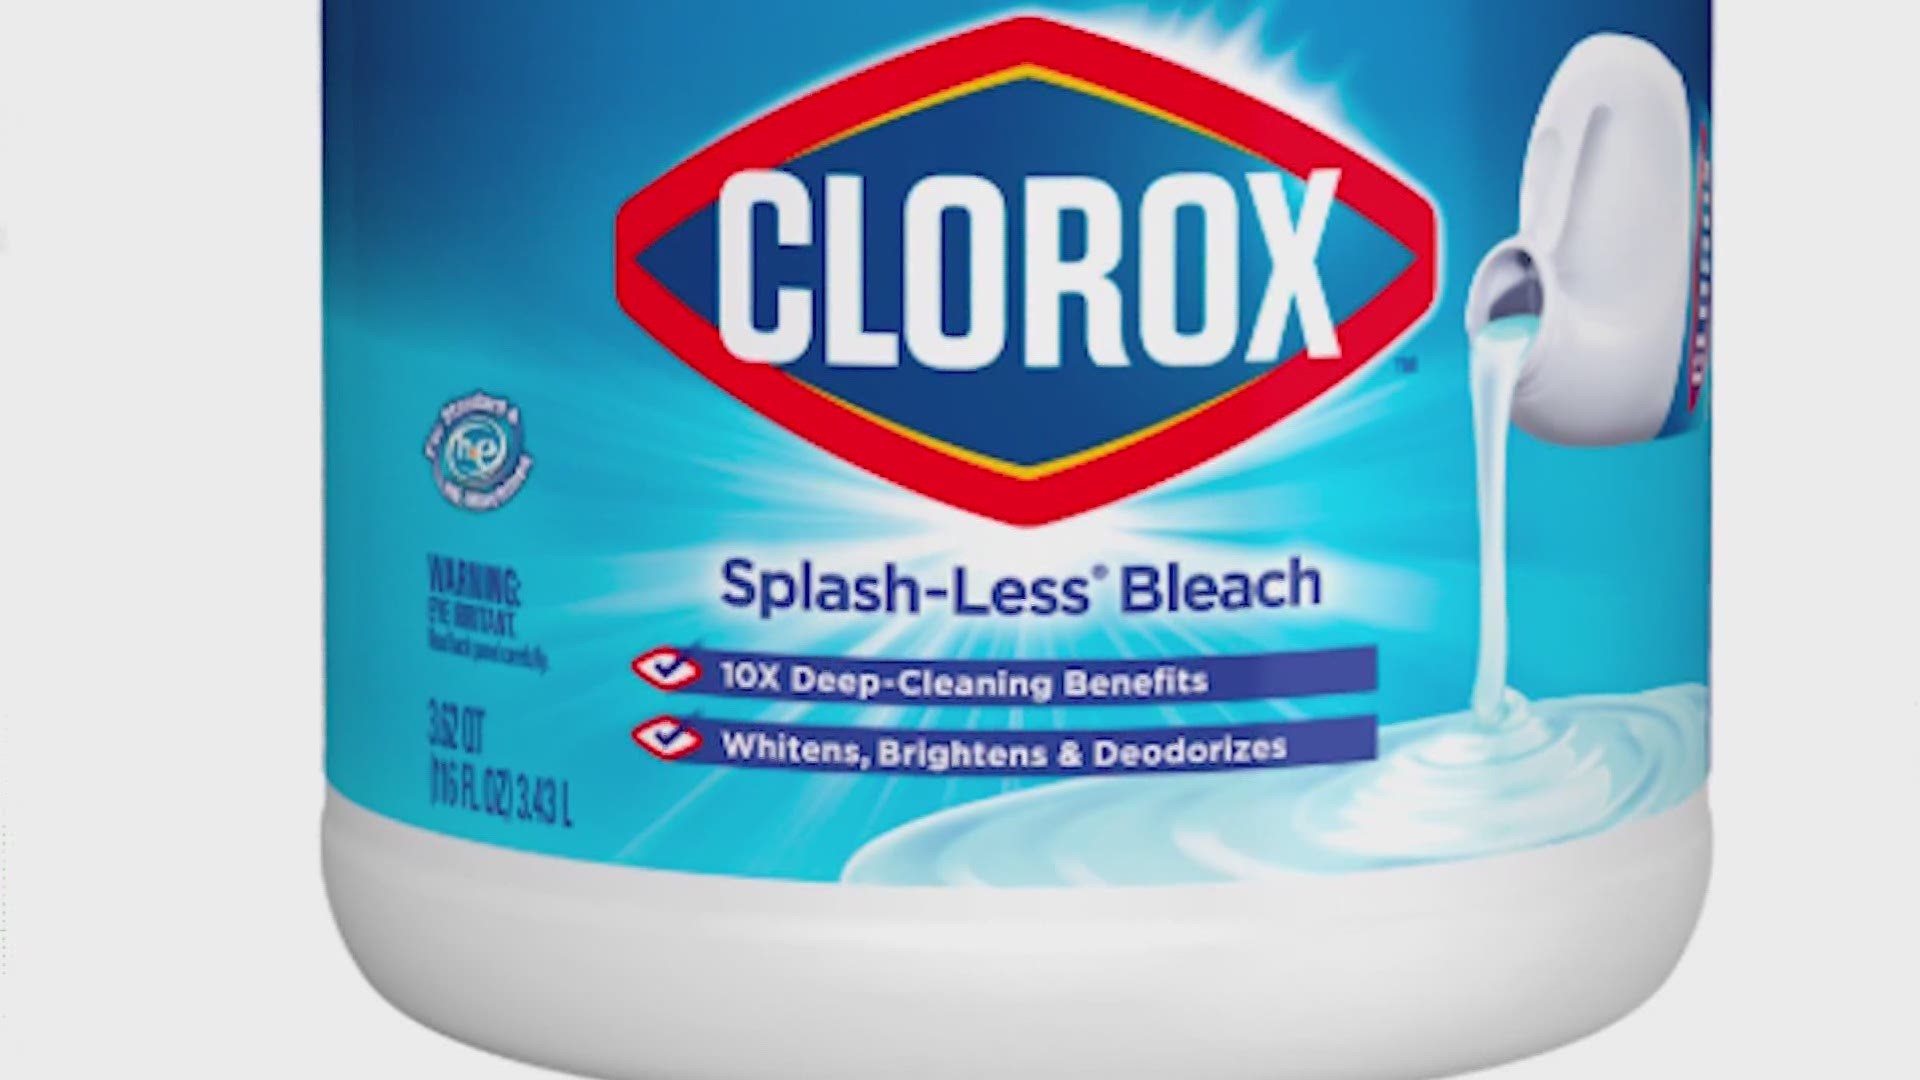 With so many cleaners available to keep our homes germ-free, many are questioning the effectiveness of one well-known bleach...